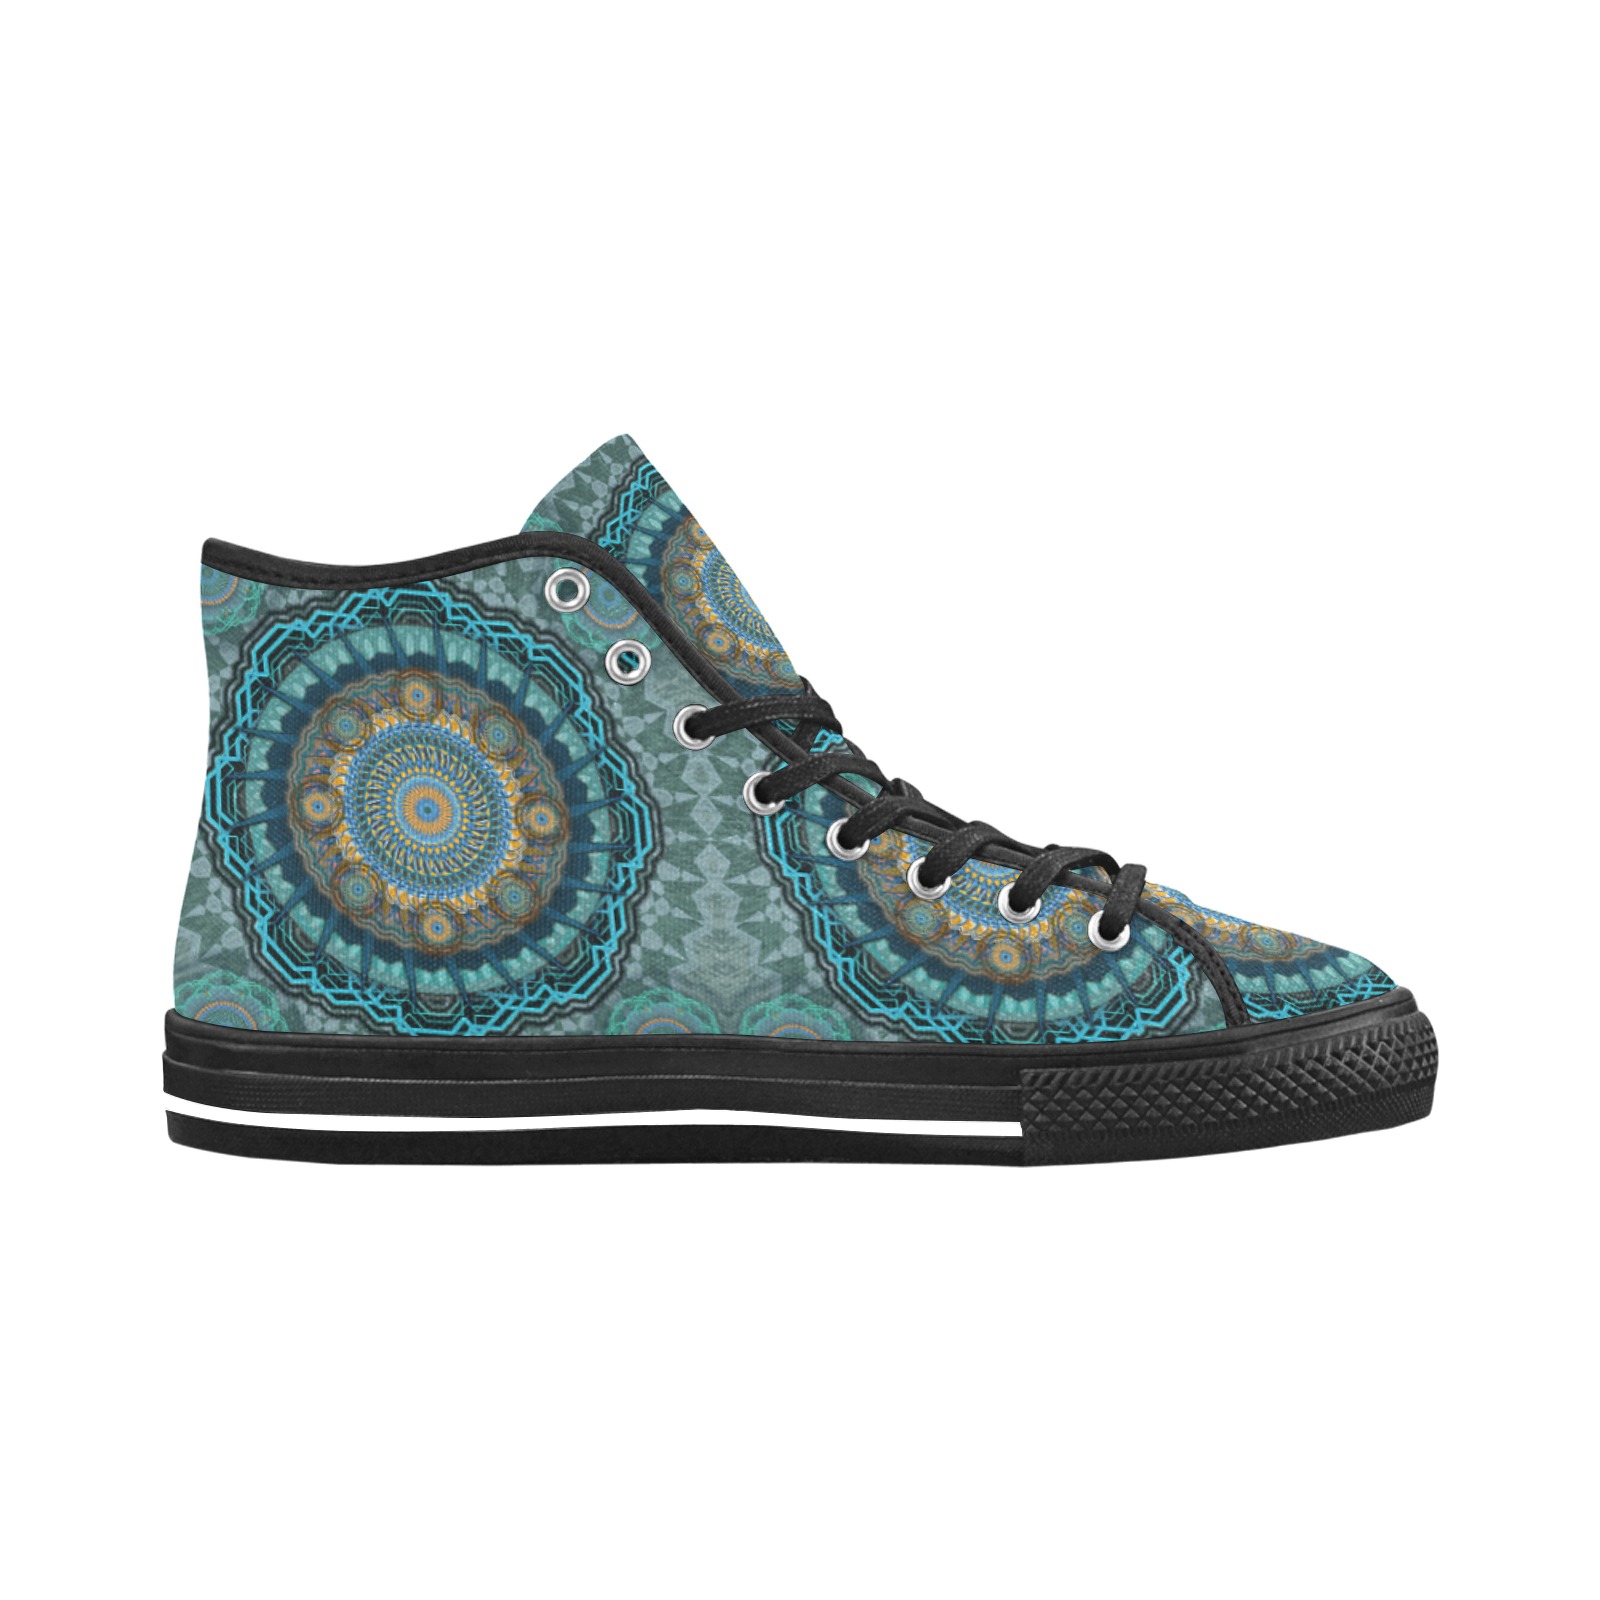 The Persian's gyrate psychedelic eyes' mandala Vancouver H Men's Canvas Shoes (1013-1)